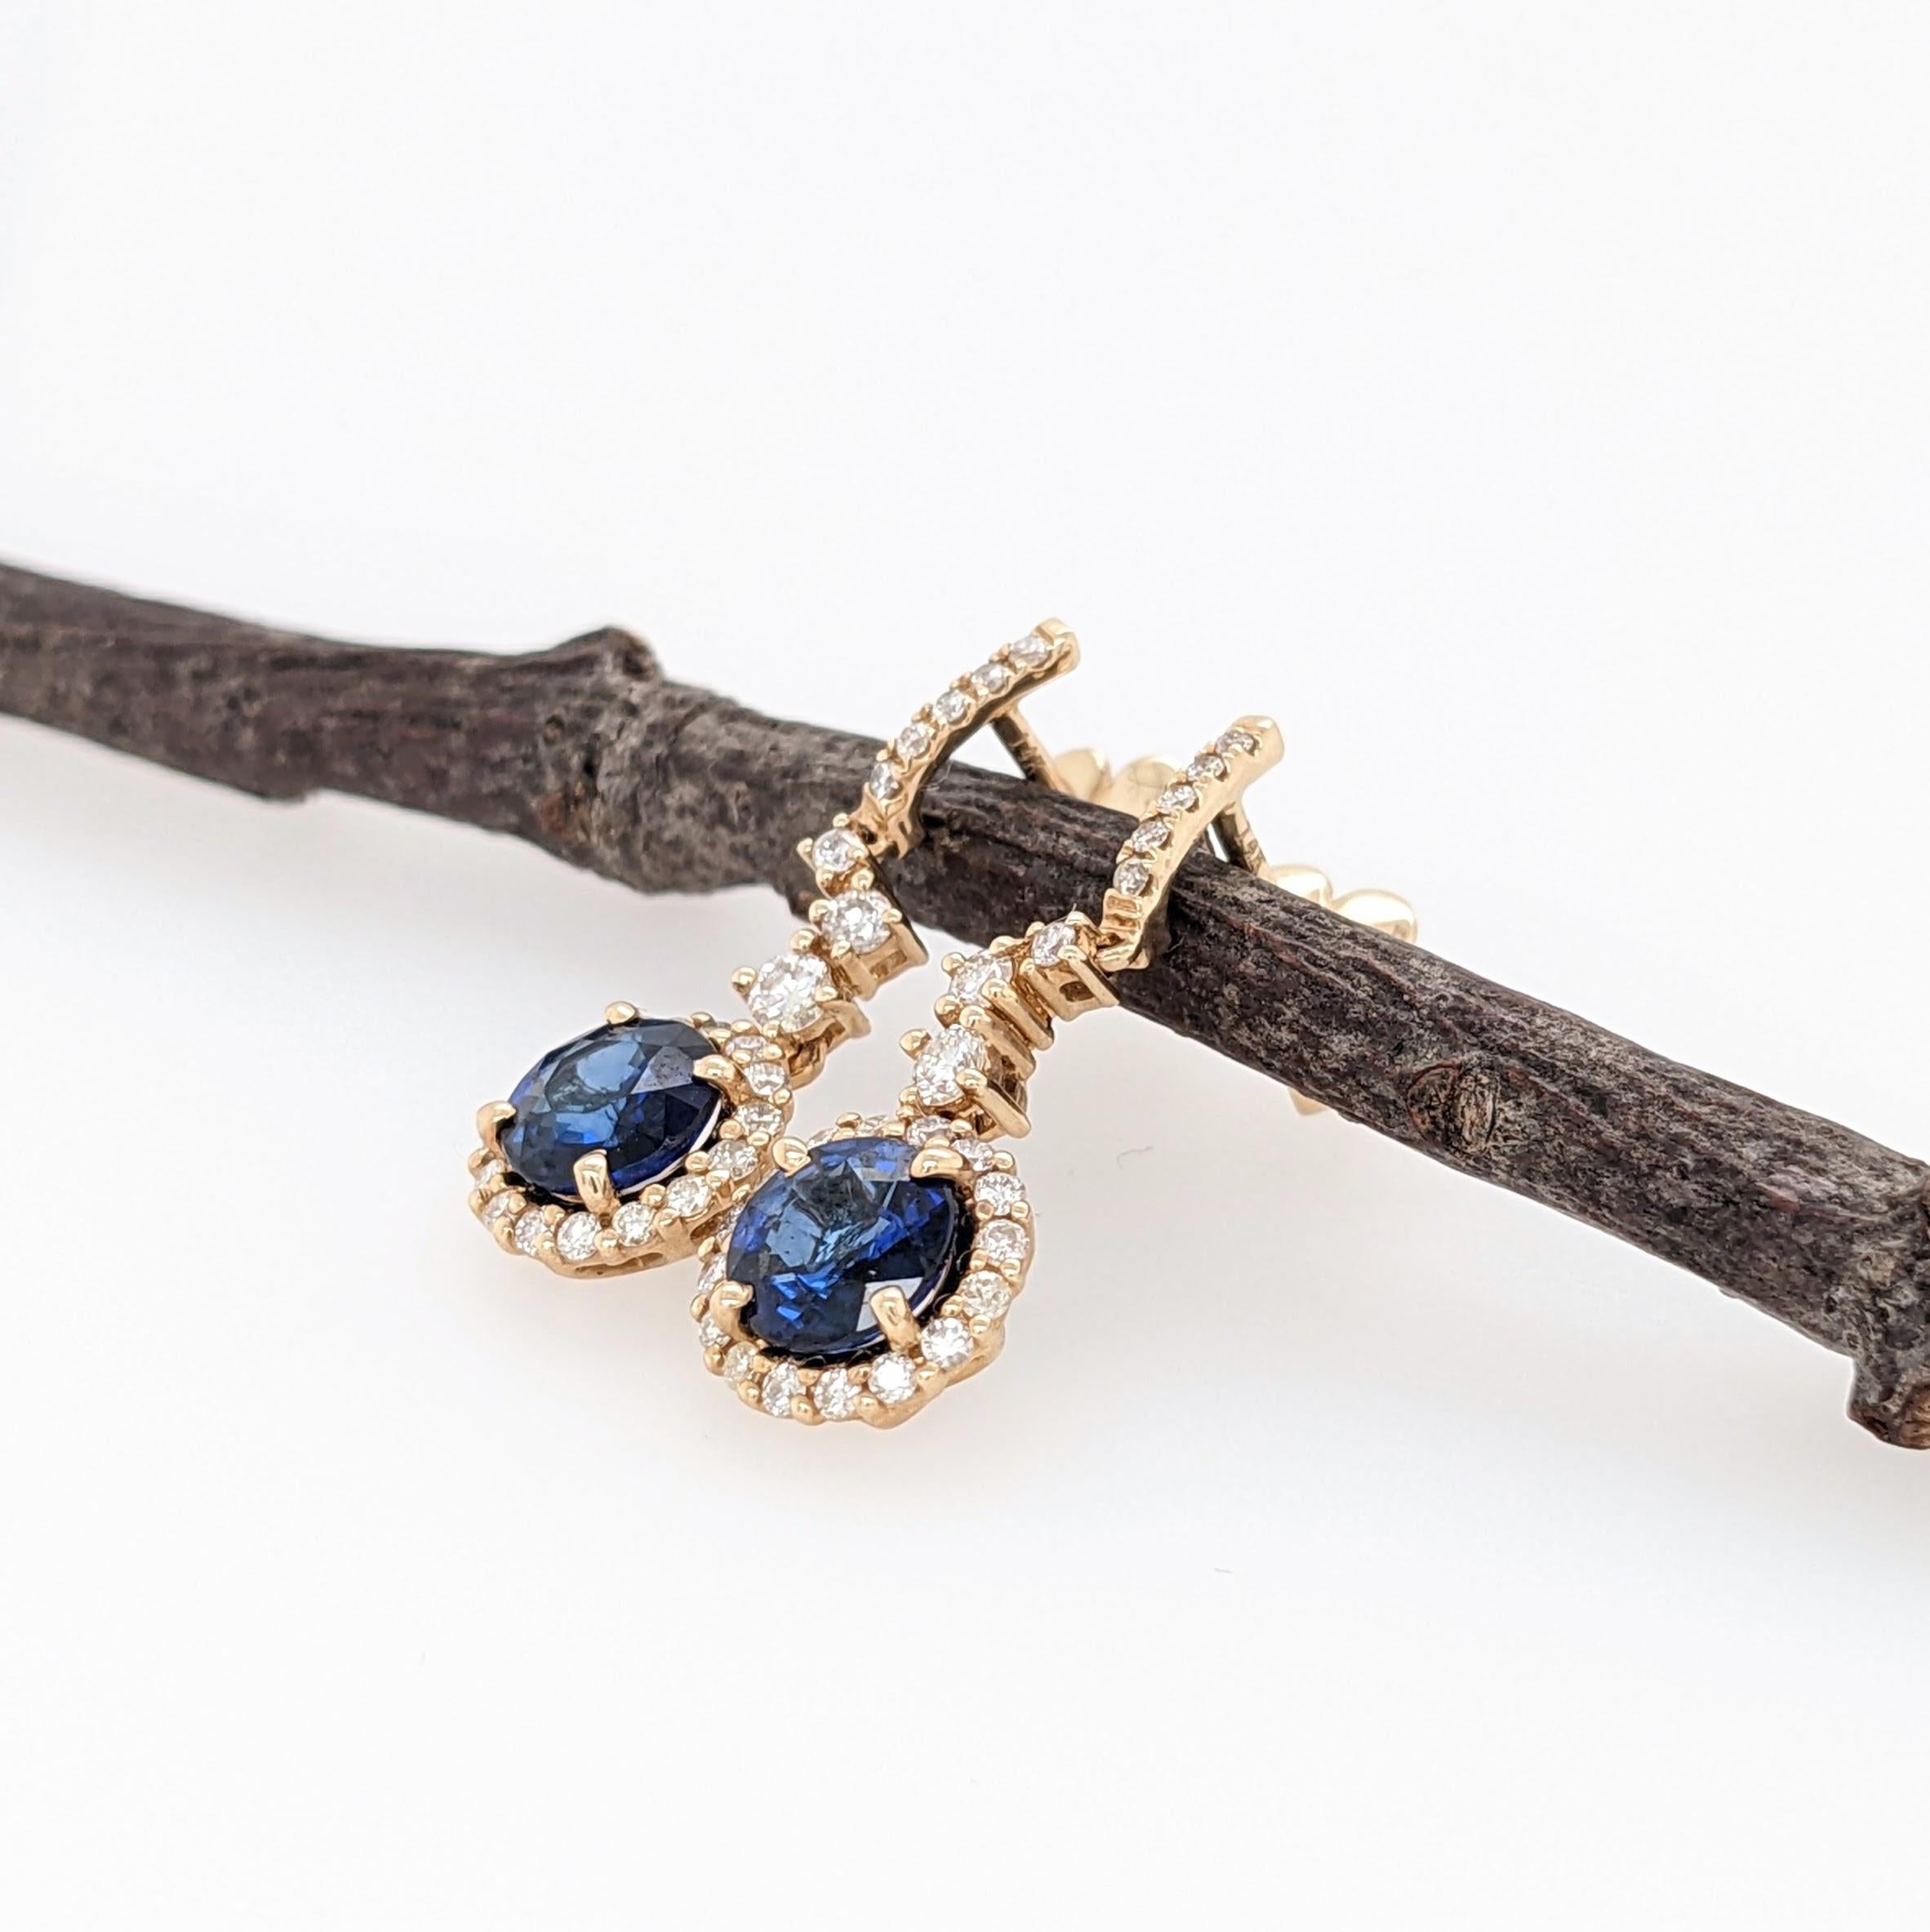 Modernist 1.77 cts Blue Sapphire Dangle Earrings in 14K Gold w Diamond Accents Round 6mm For Sale